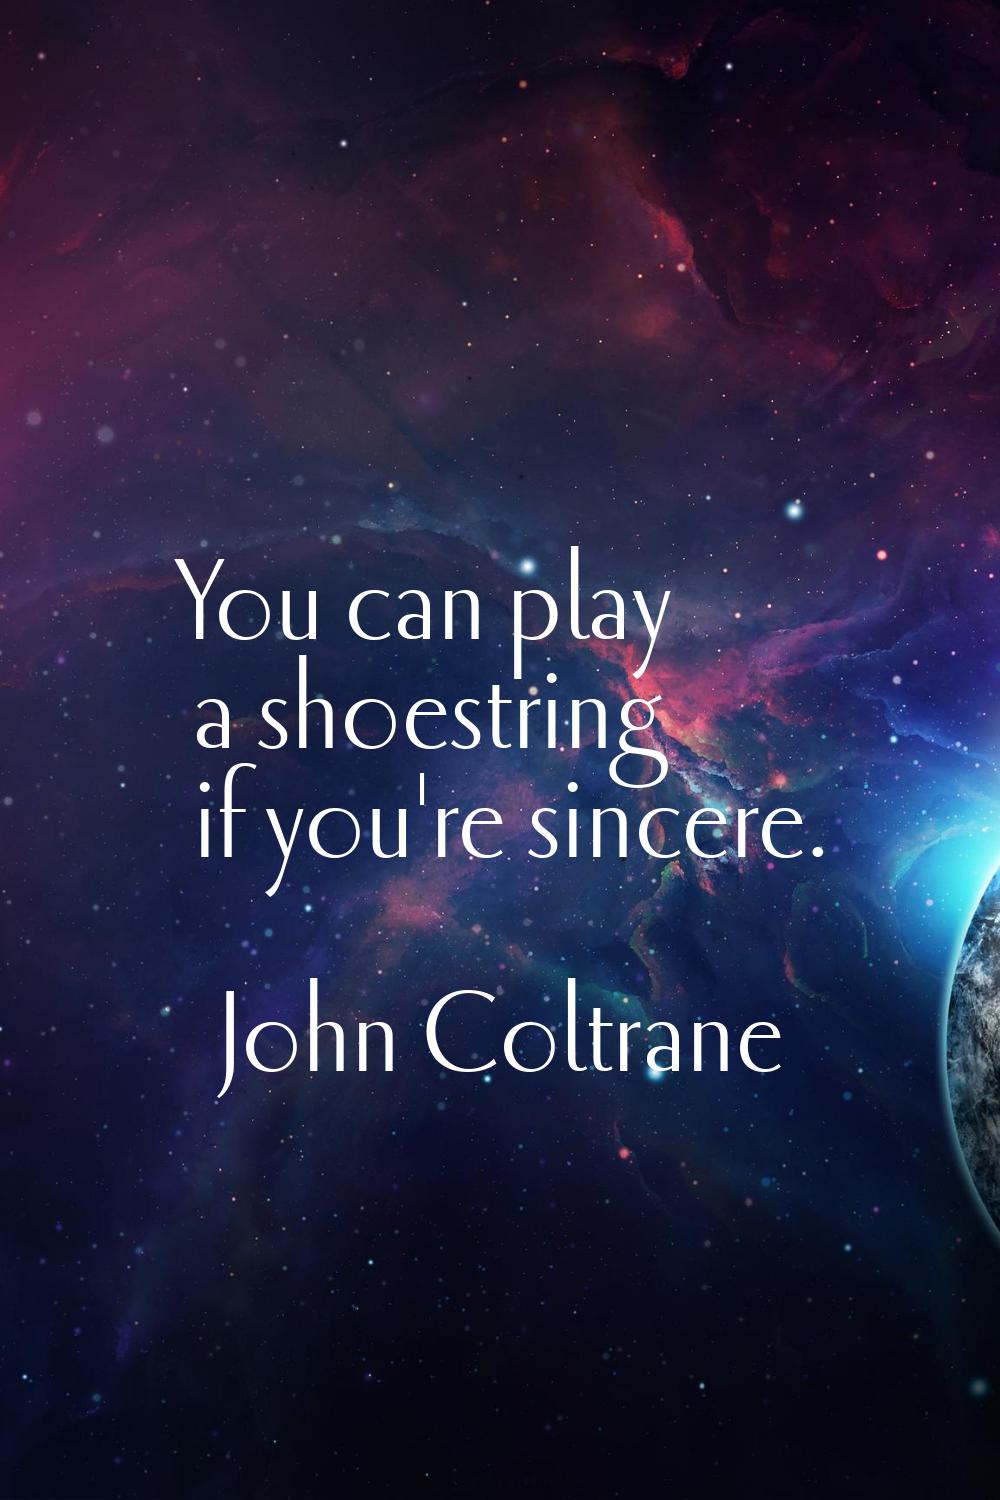 You can play a shoestring if you're sincere.